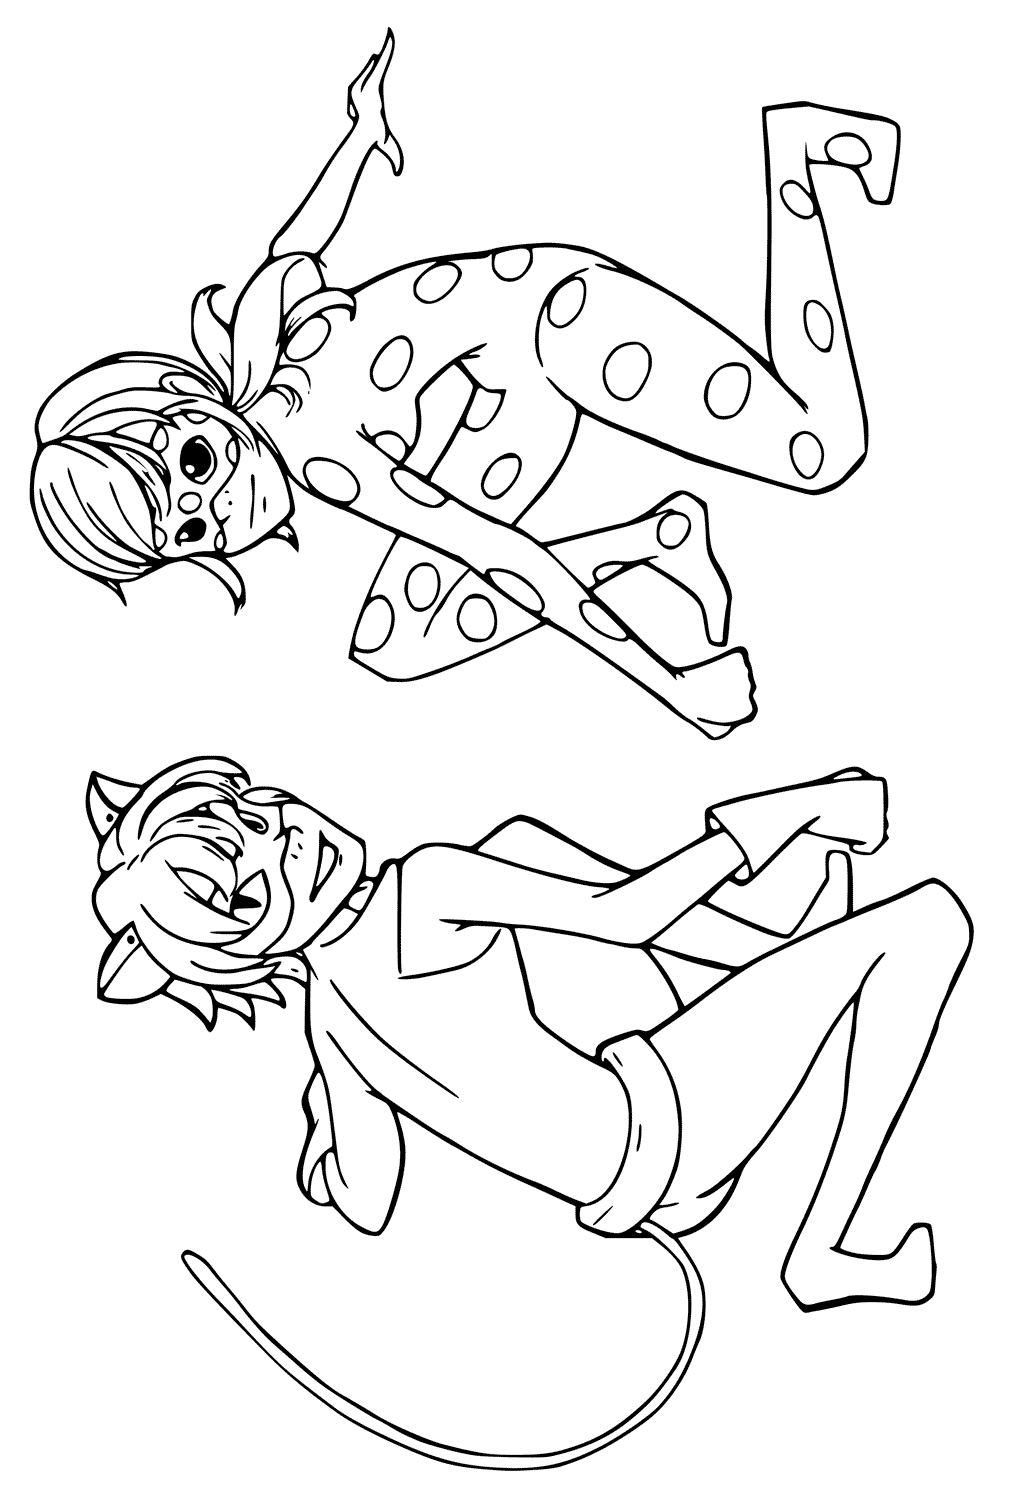 Kids-n-fun.com | Coloring page Miraculous Tales of Ladybug and Cat Noir ...